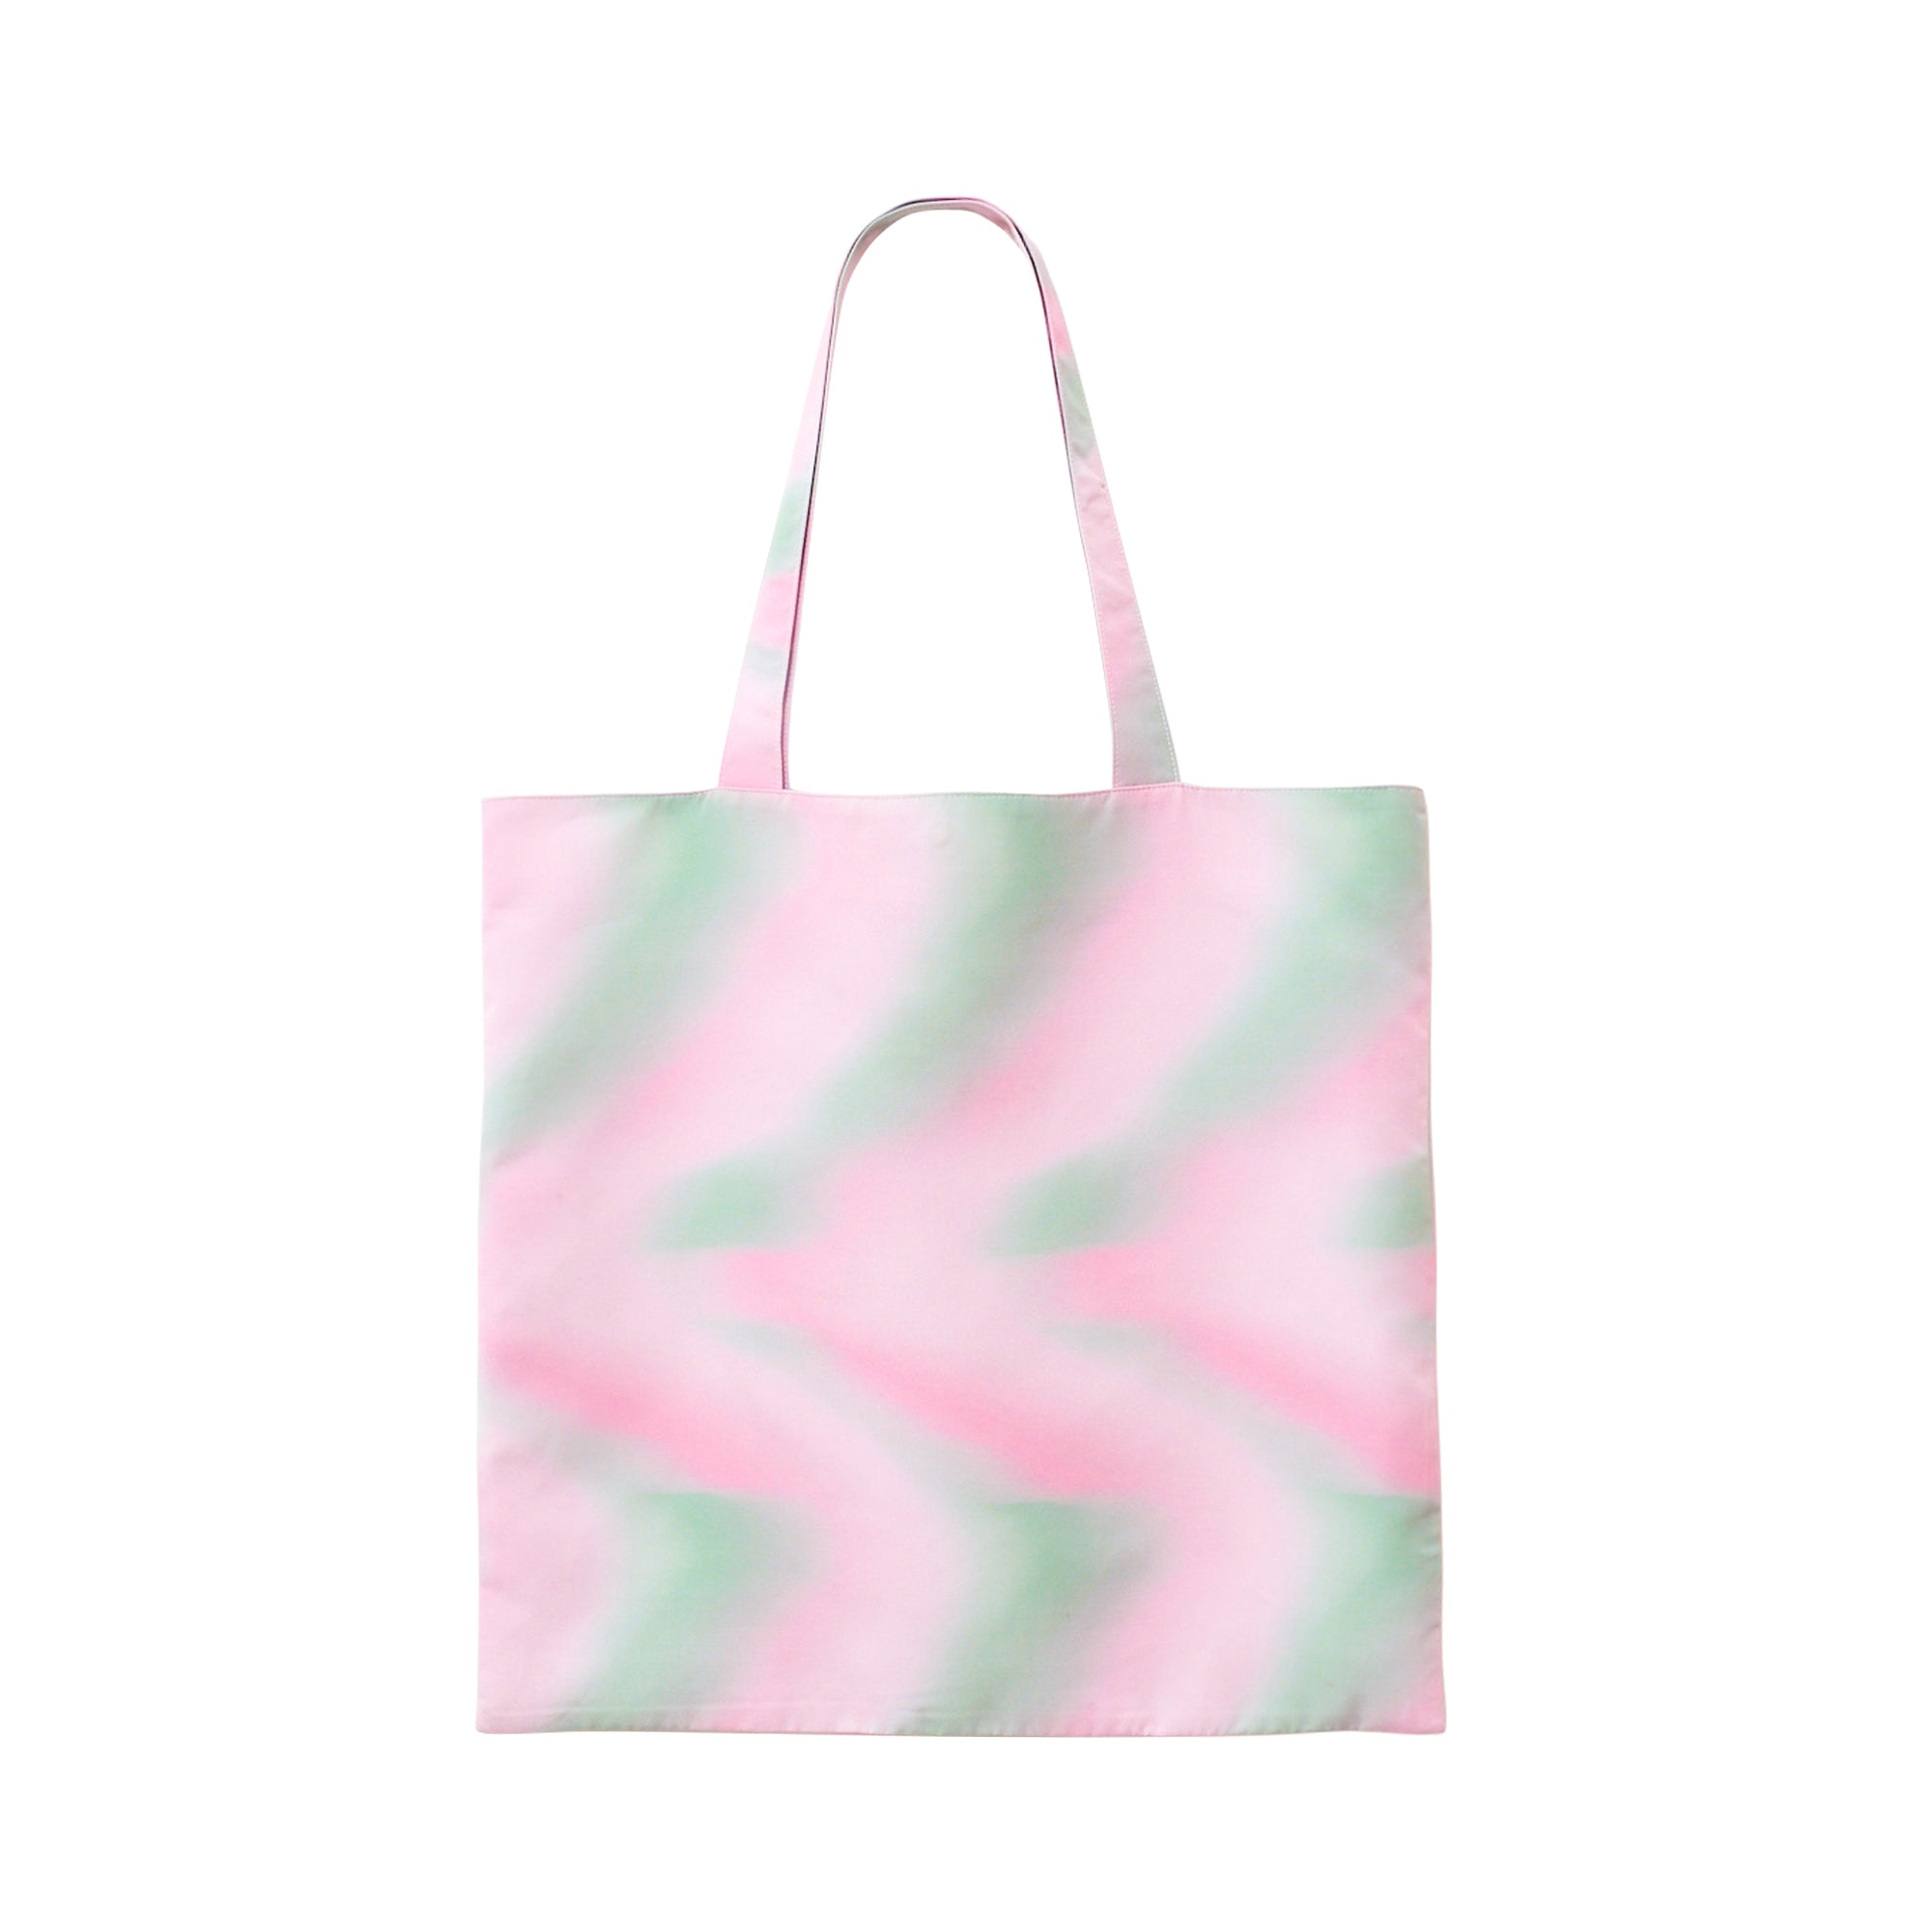 "Day Dream" Tote Bag - Pink Waves